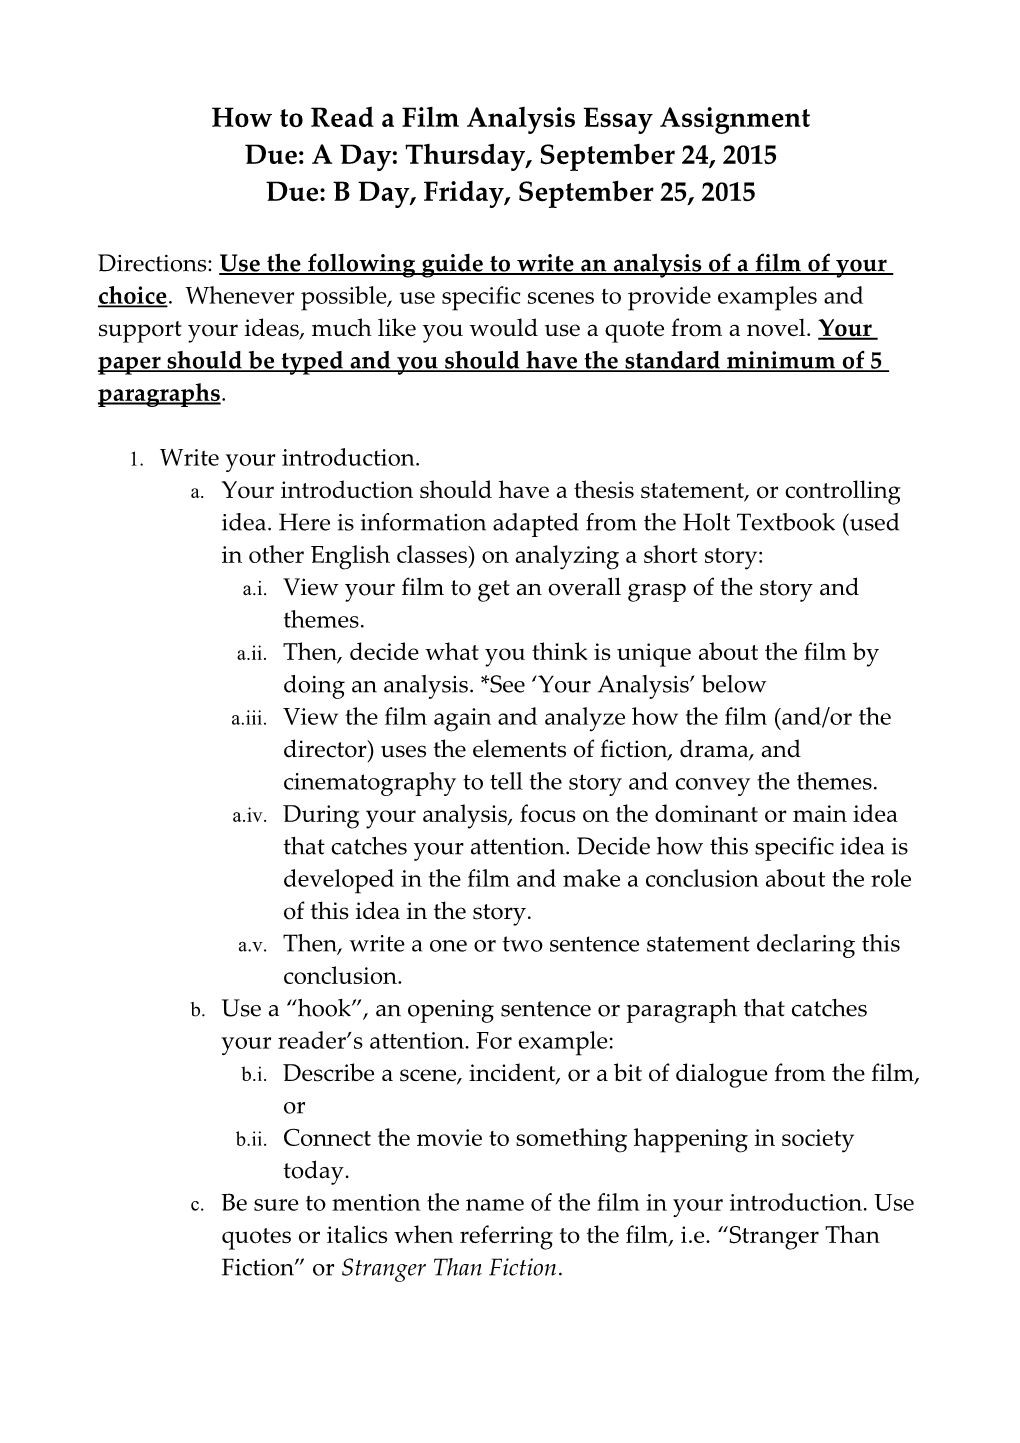 How to Read a Film Analysis Essay Assignment